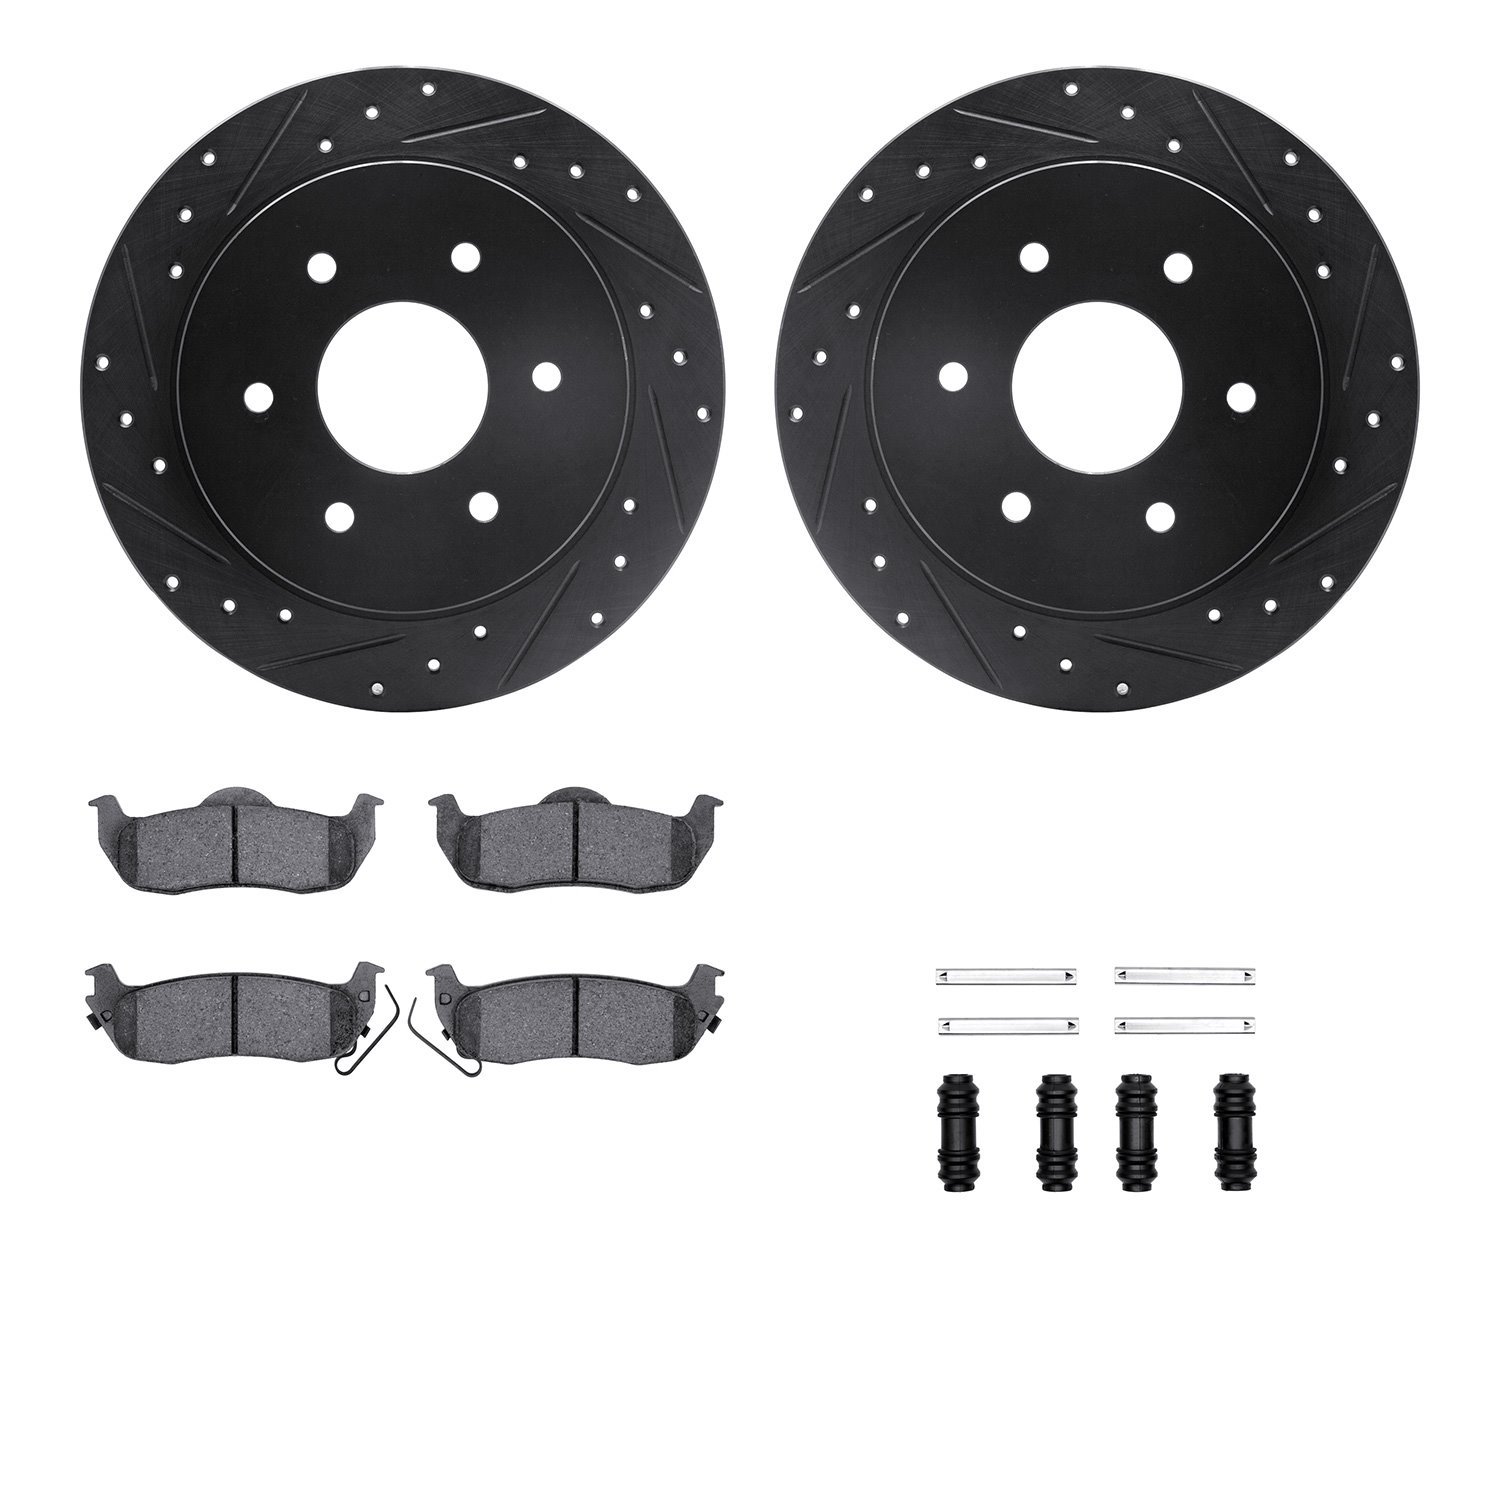 8412-67001 Drilled/Slotted Brake Rotors with Ultimate-Duty Brake Pads Kit & Hardware [Black], 2004-2015 Infiniti/Nissan, Positio